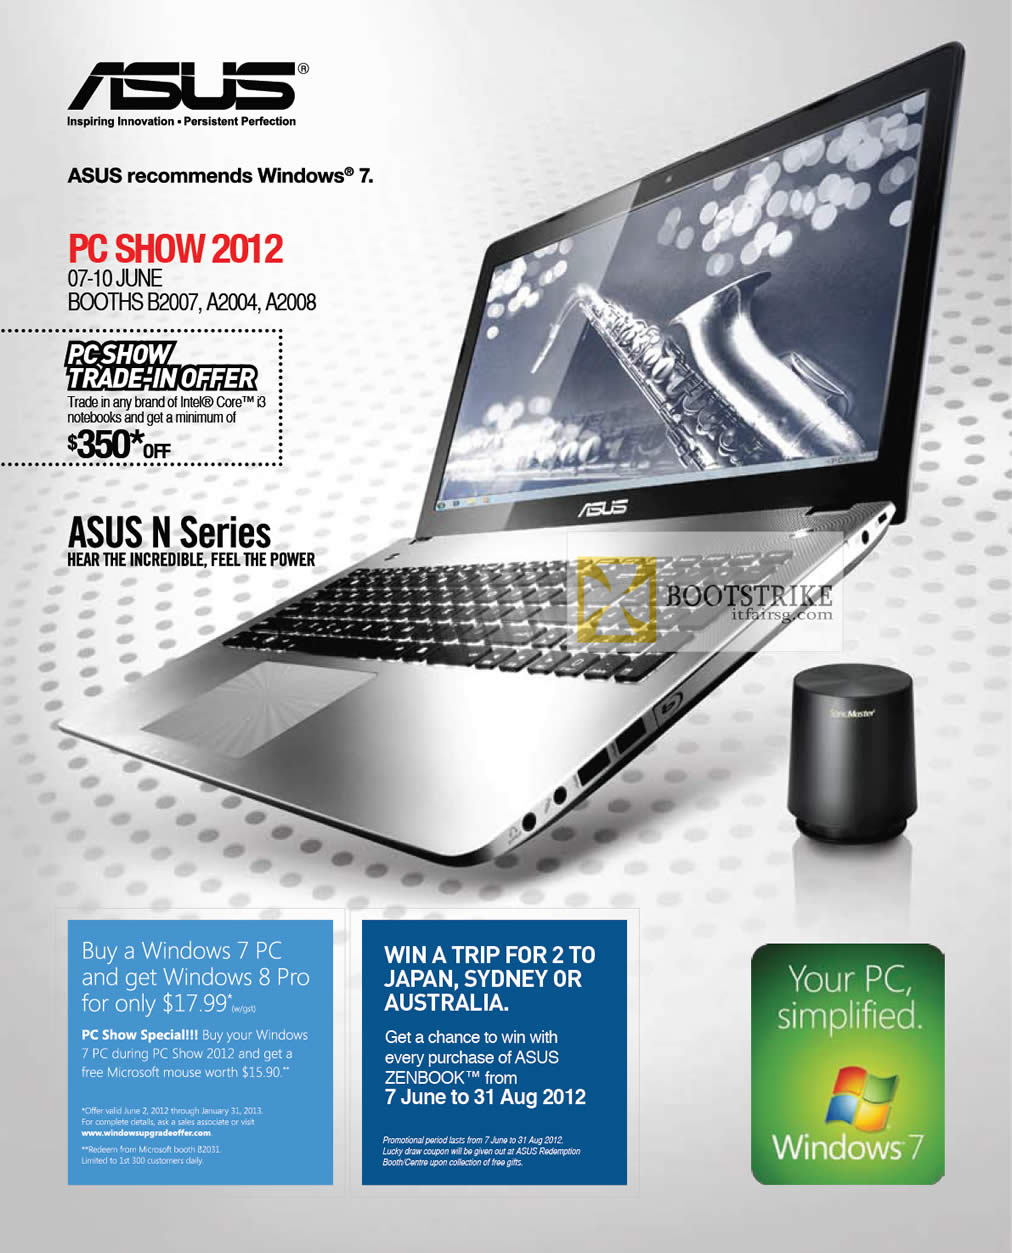 PC SHOW 2012 price list image brochure of ASUS Notebook N Series Features, Trade In